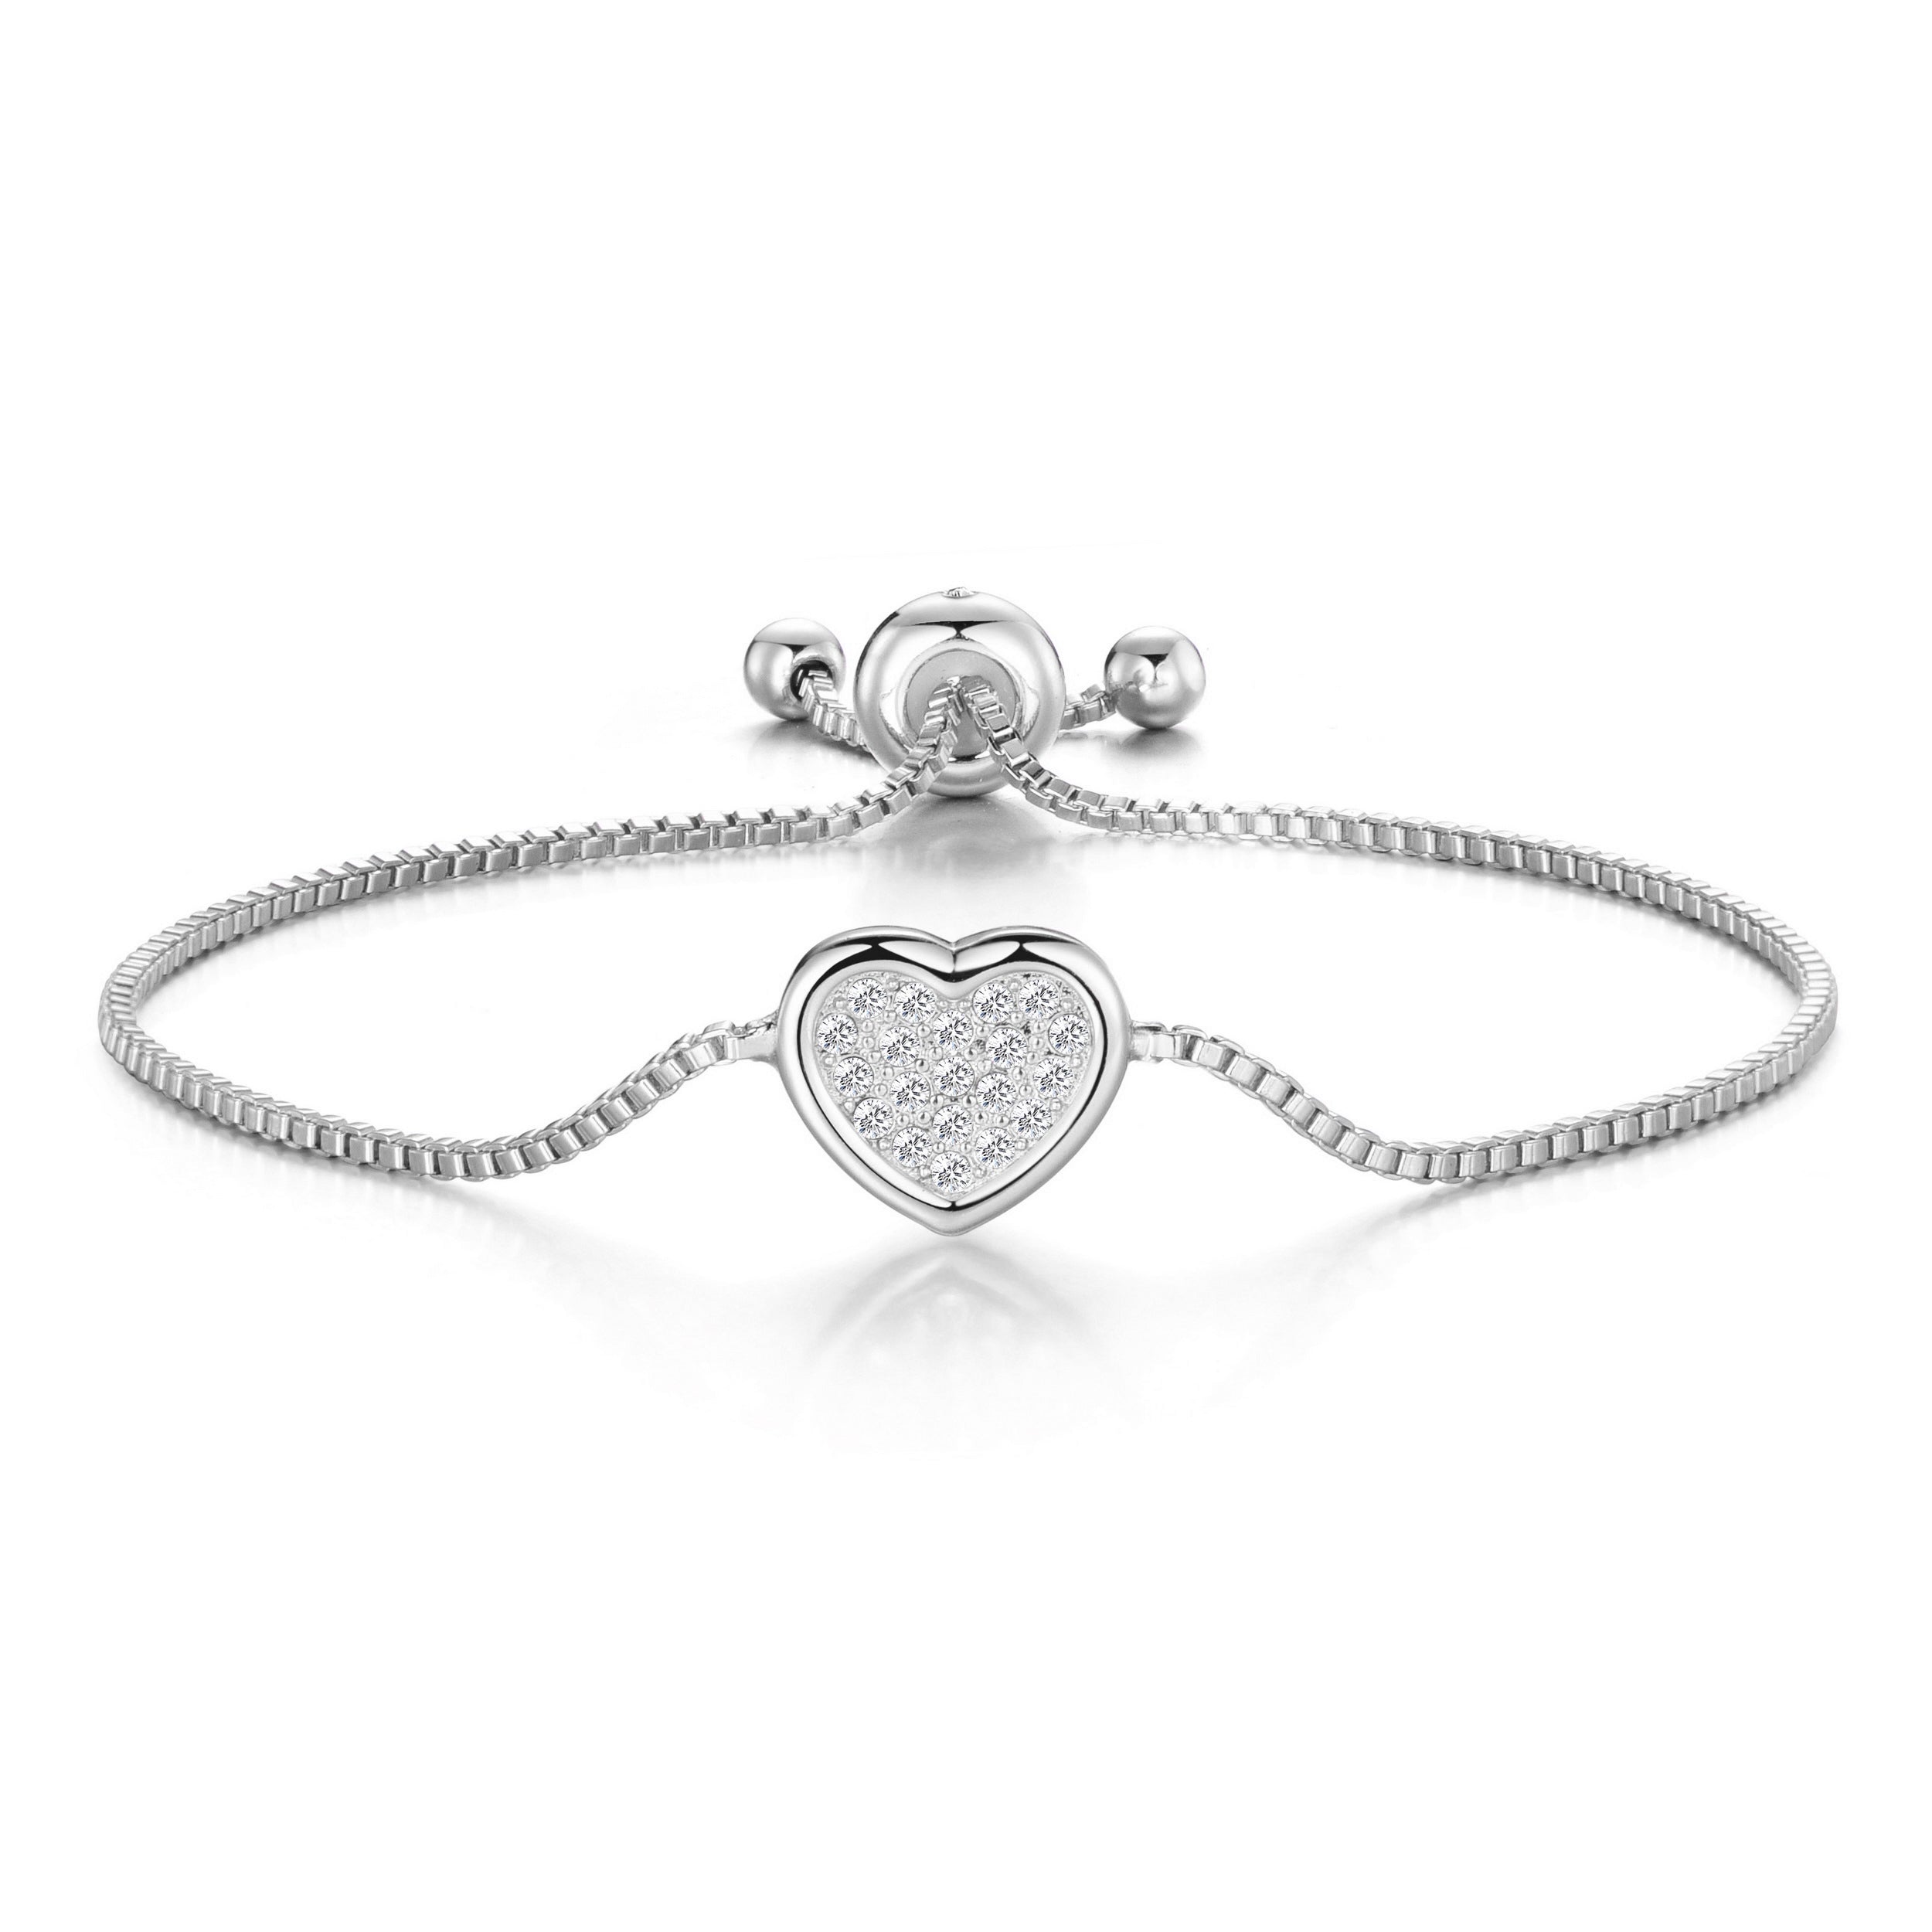 Silver Plated Pave Heart Friendship Bracelet Created with Zircondia® Crystals by Philip Jones Jewellery